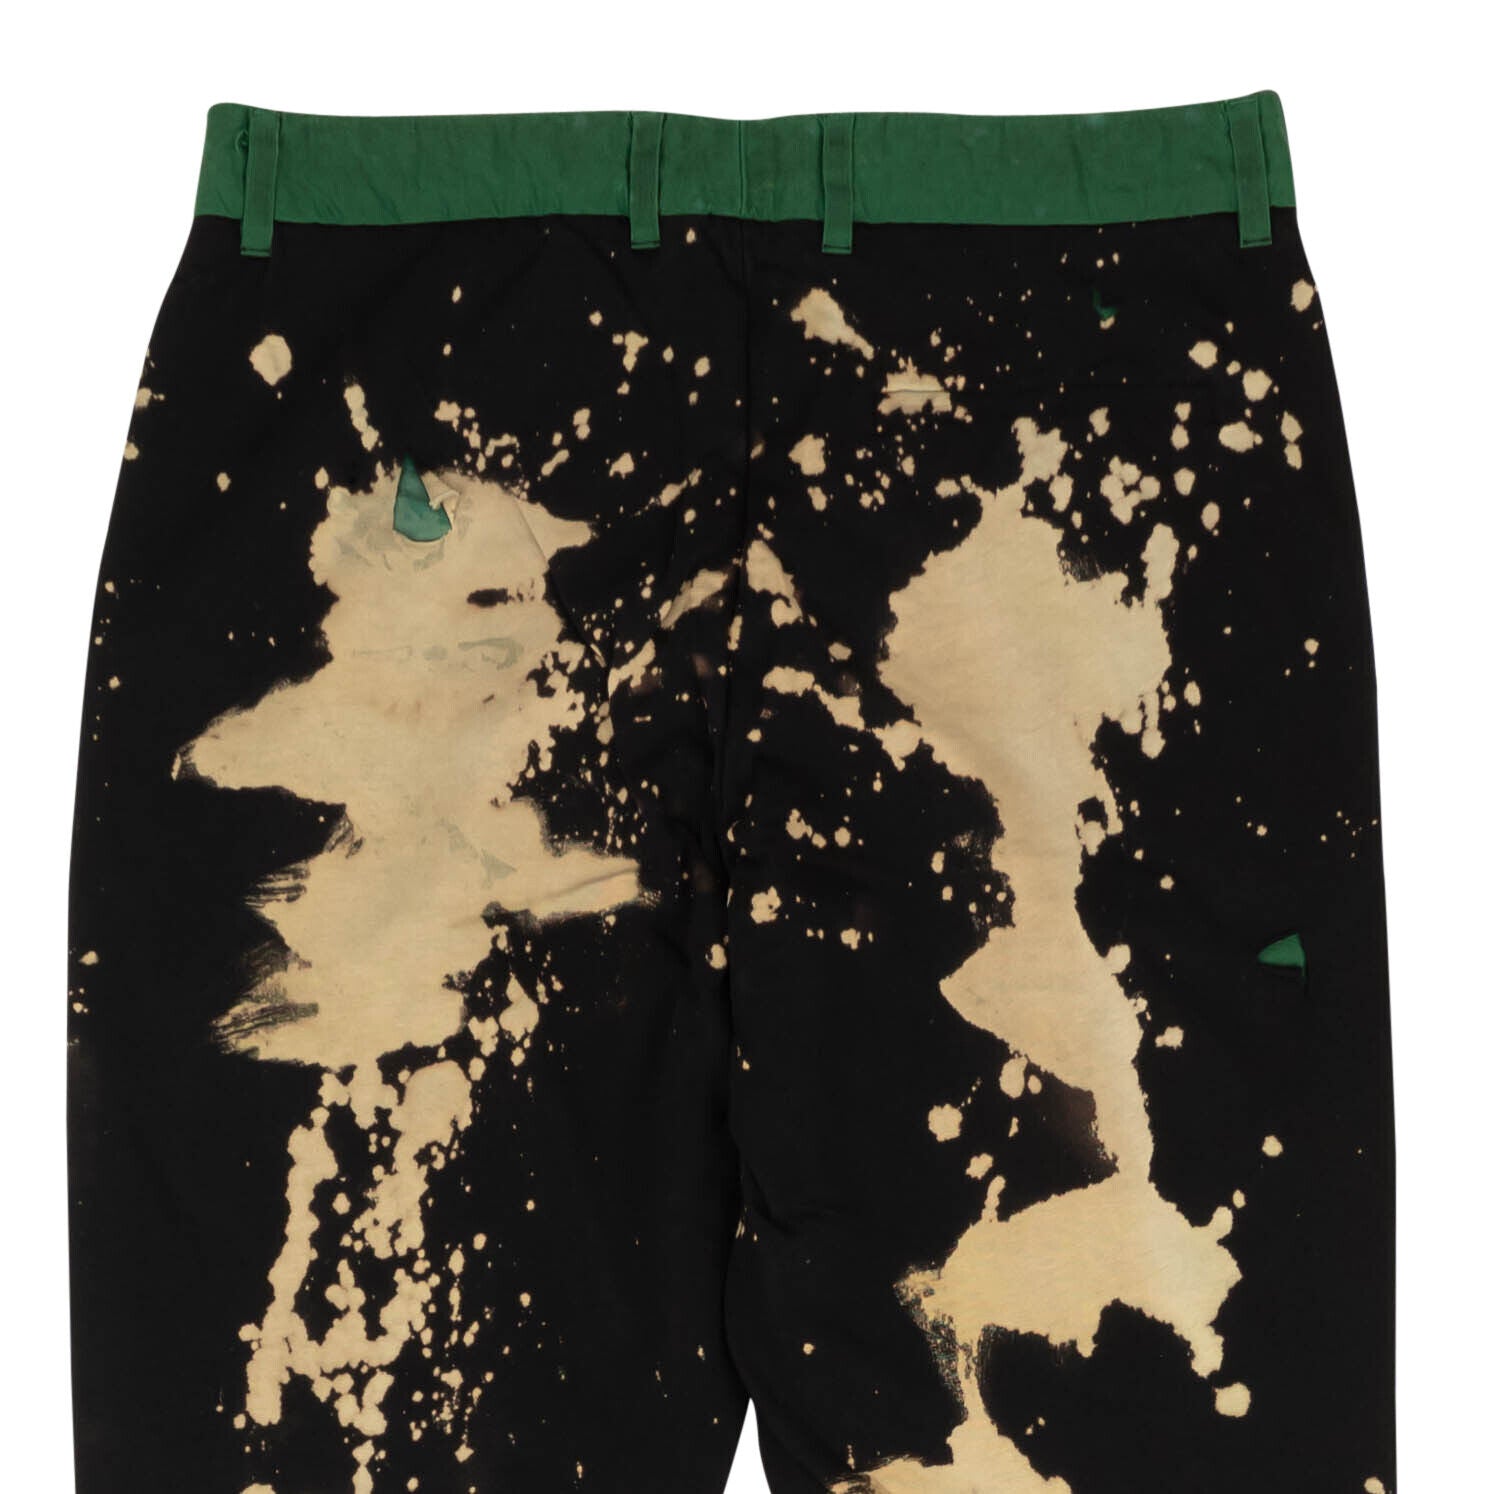 424 On Fairfax Distressed Bleached Pants - Green/Black/Brown